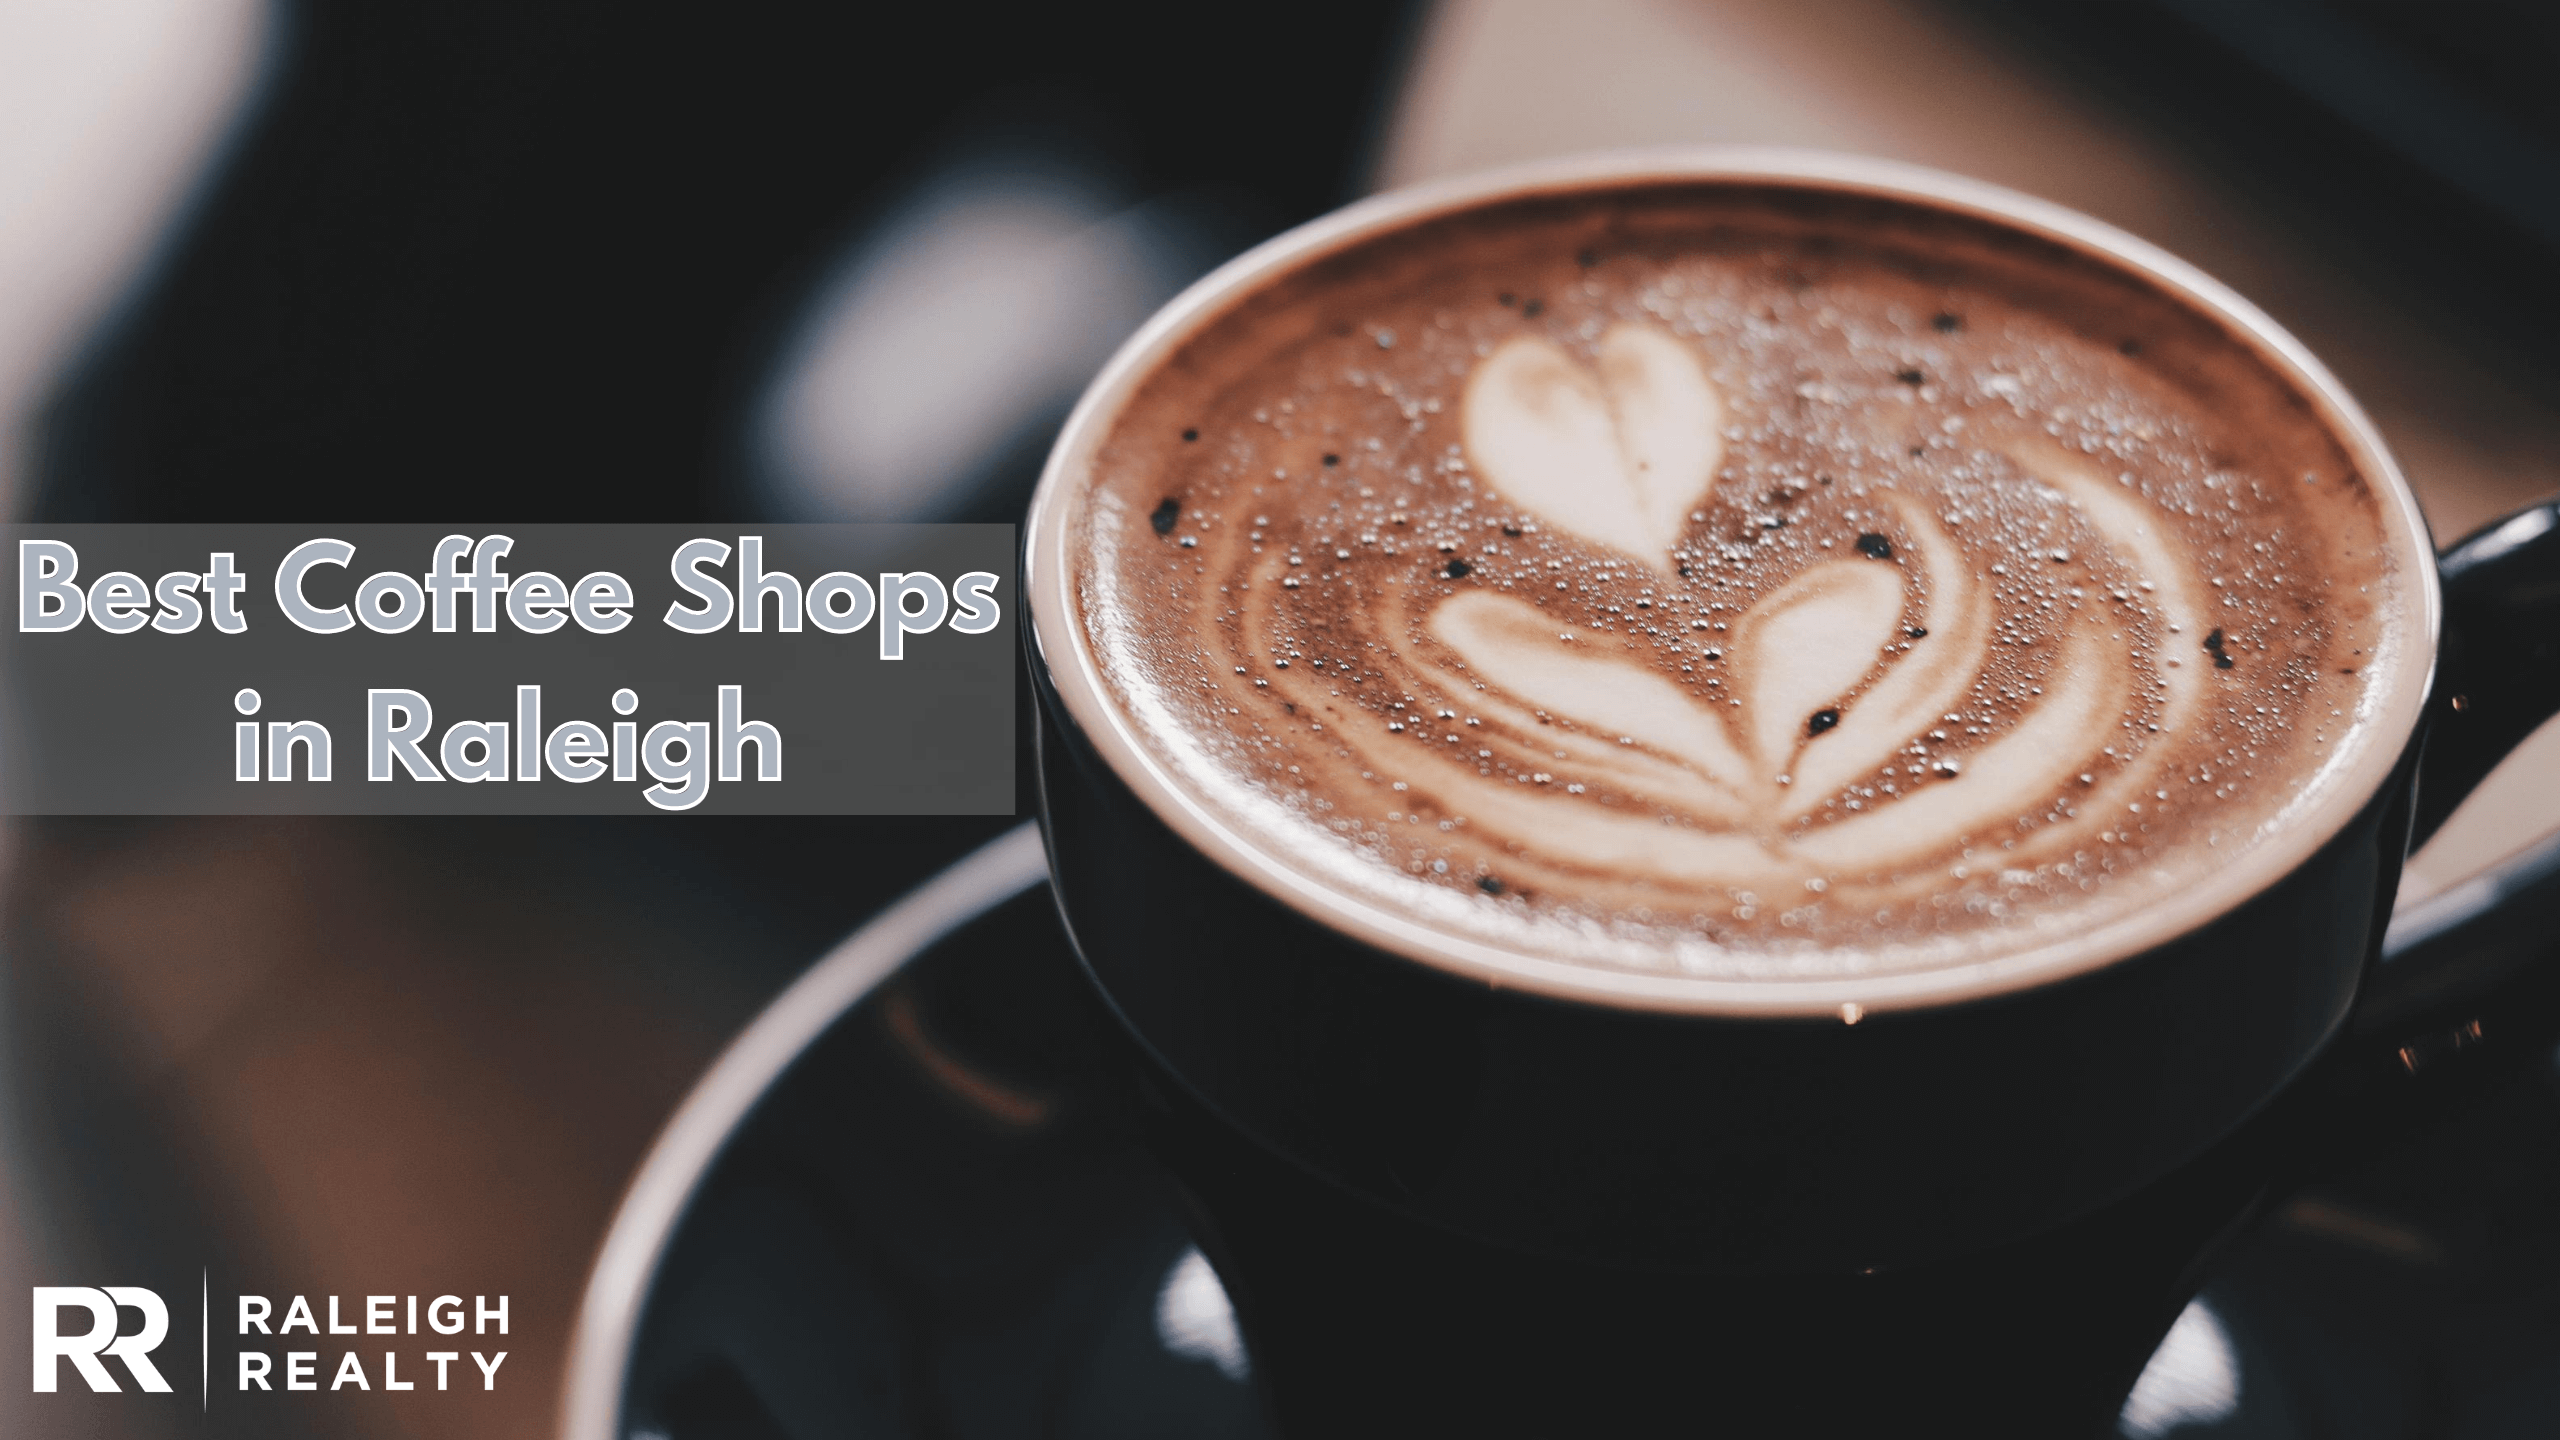 8 Best Coffee Shops in Raleigh